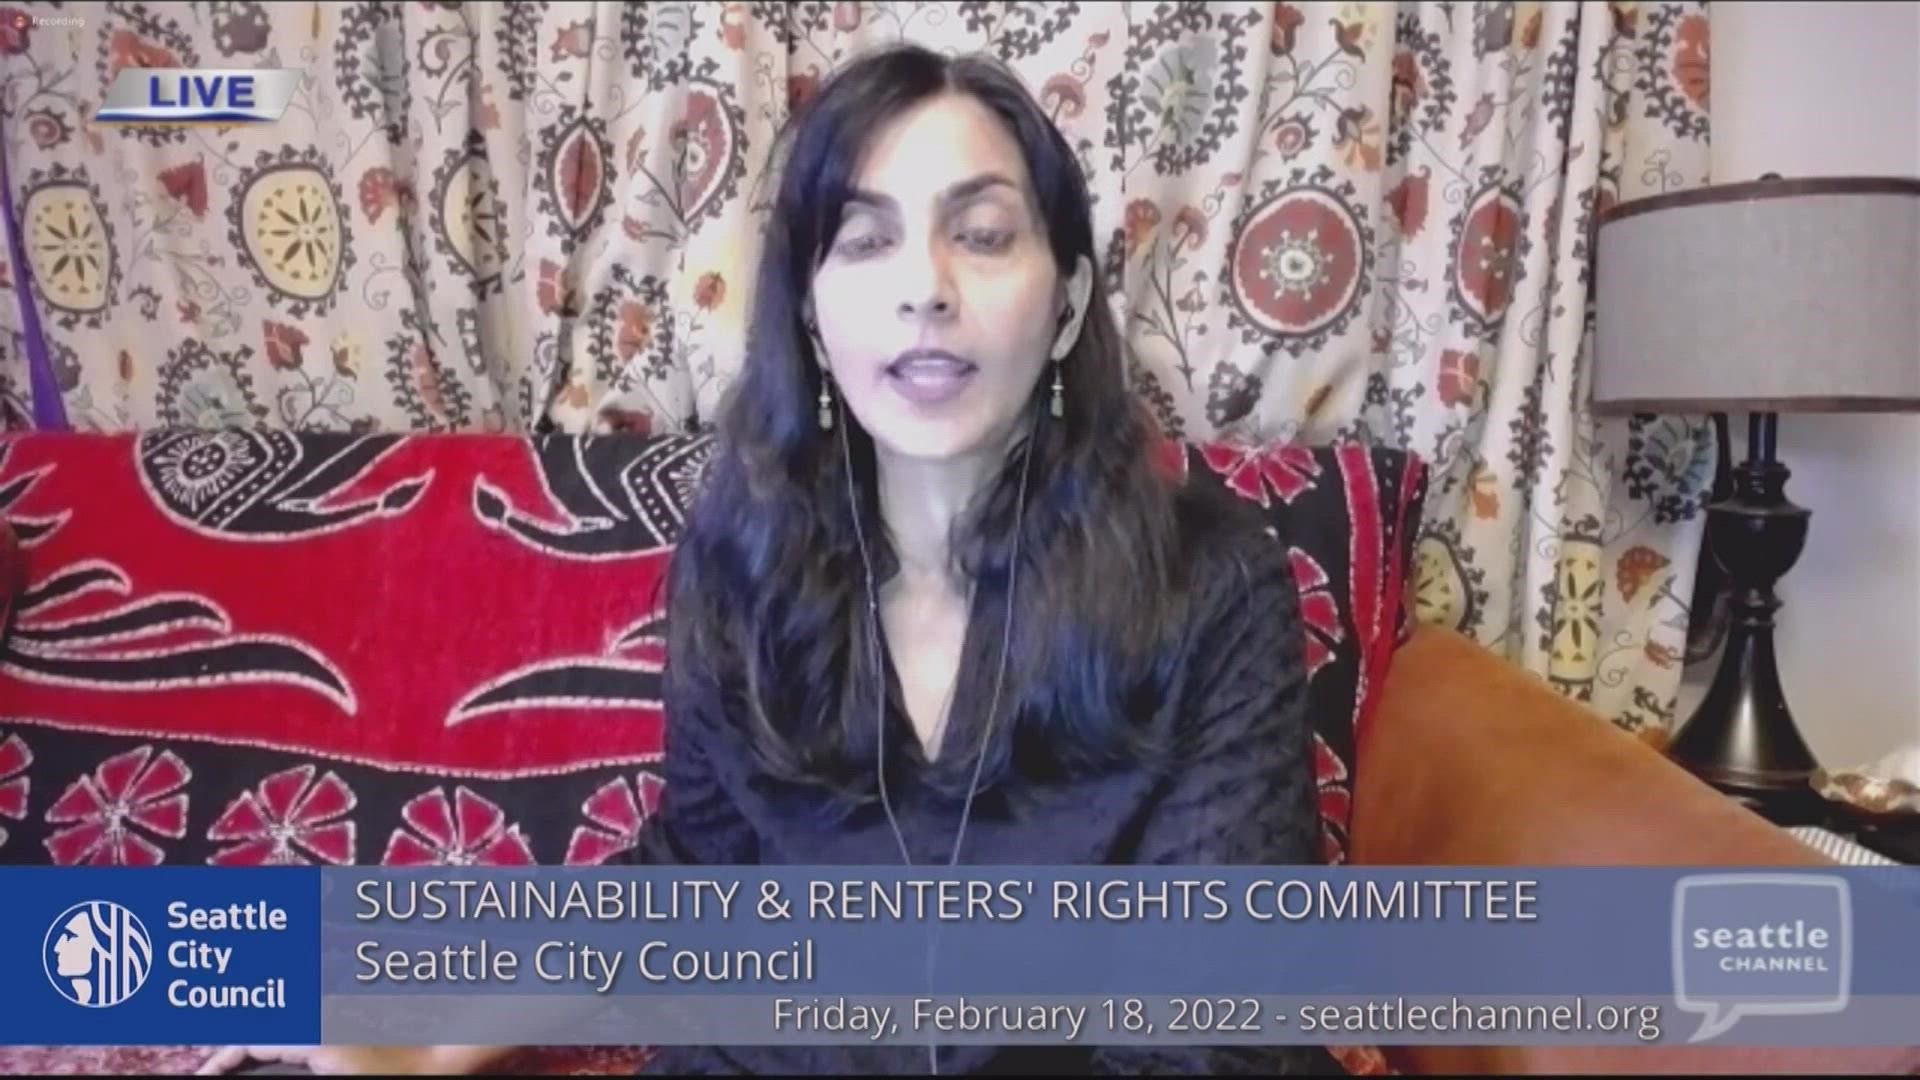 Kshama Sawant's resolution will be proposed to the Seattle City Council on Tuesday, March 1.